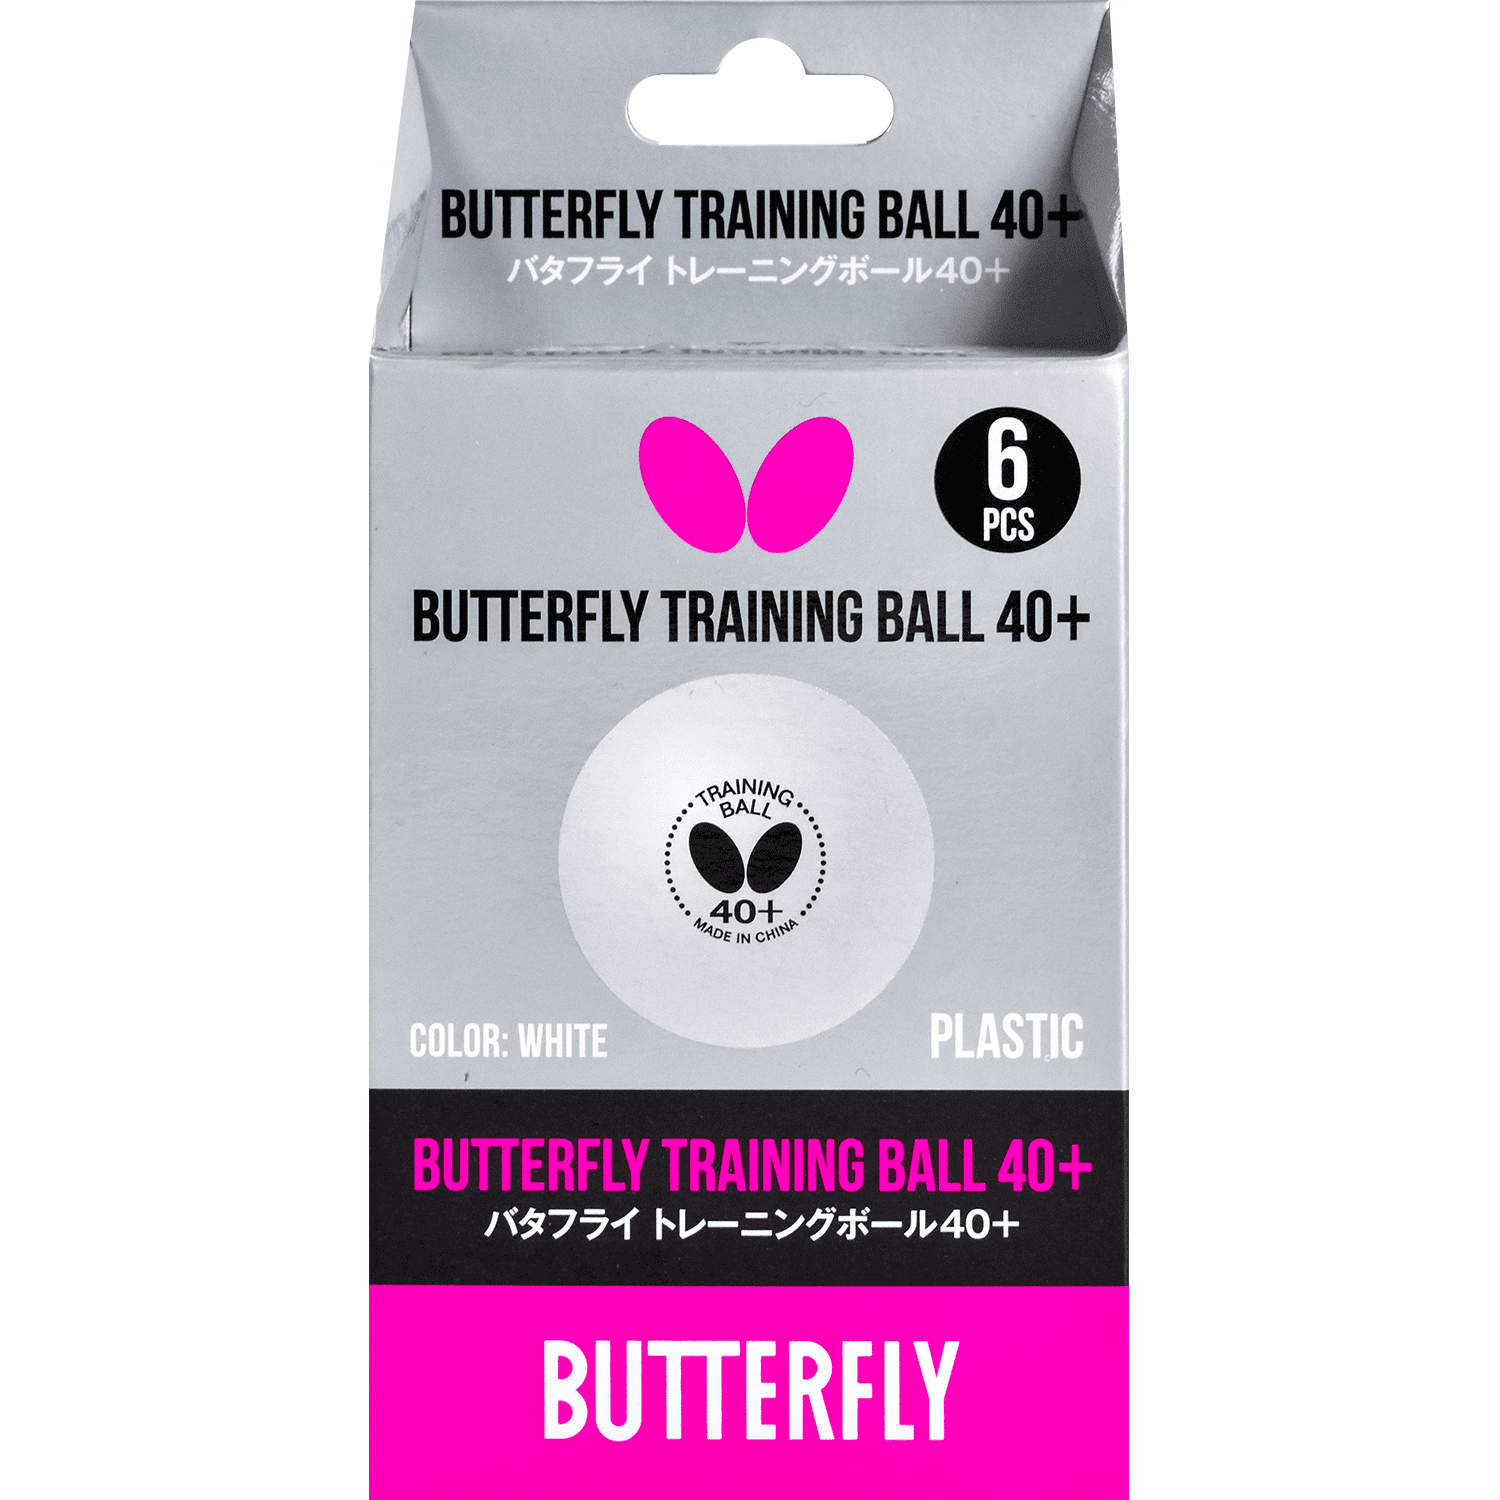 Butterfly Easy Ball White plastic Table Tennis Balls Box of 6 